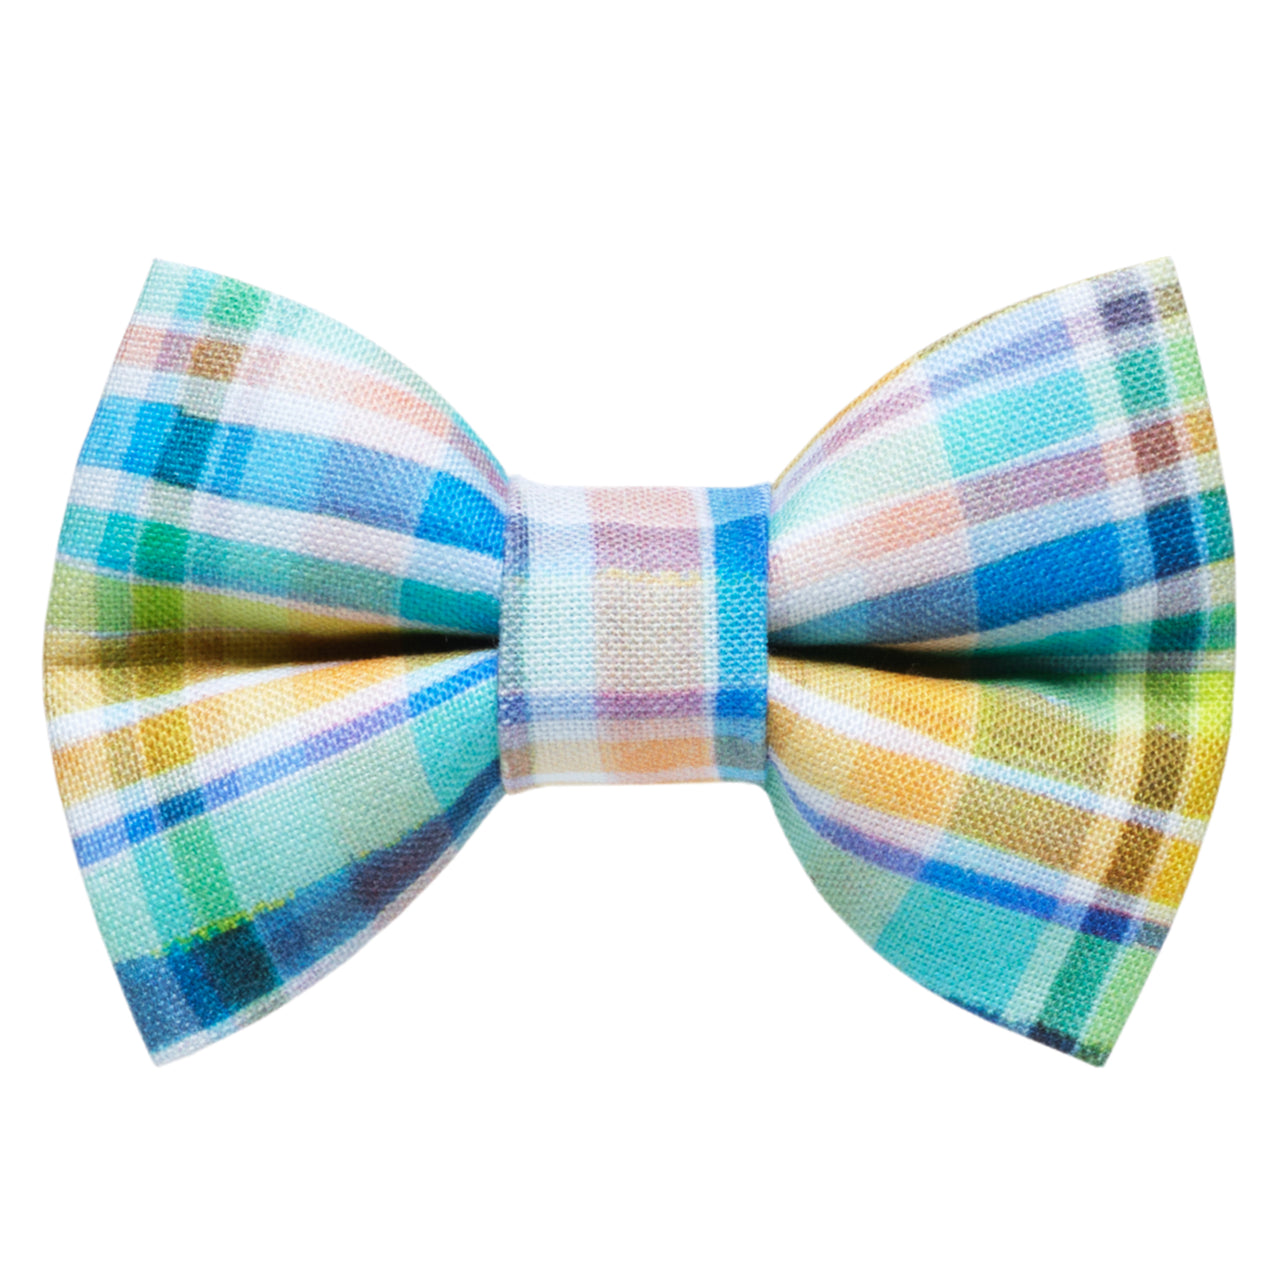 The License to Chill - Cat / Dog Bow Tie